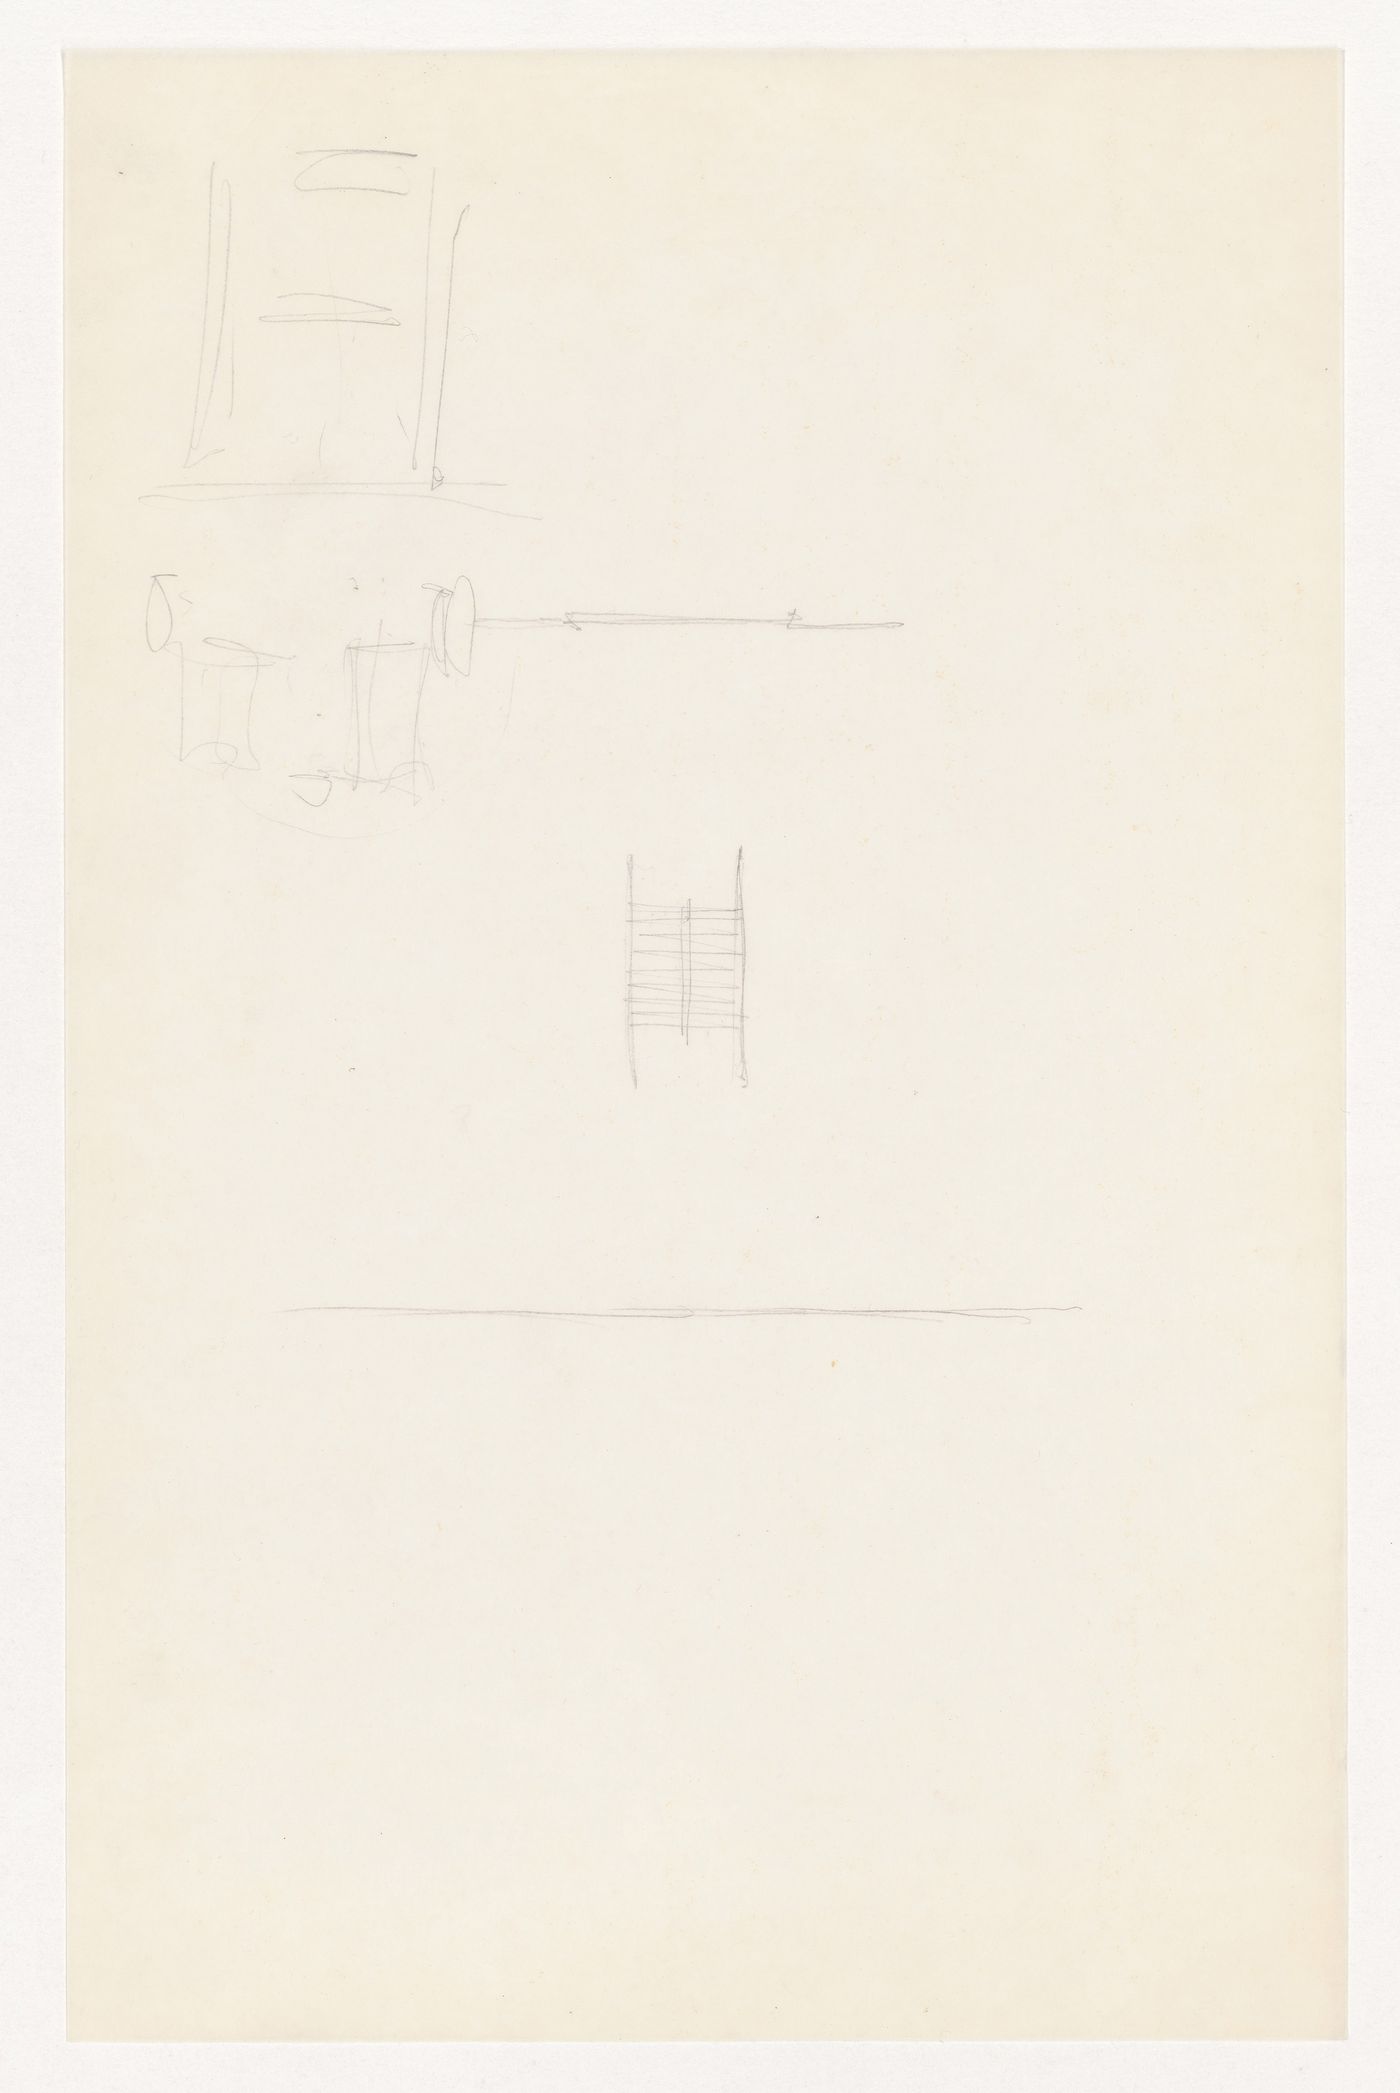 Partial sketch plan and perspective sketch for the Metallurgy Building, Illinois Institute of Technology, Chicago